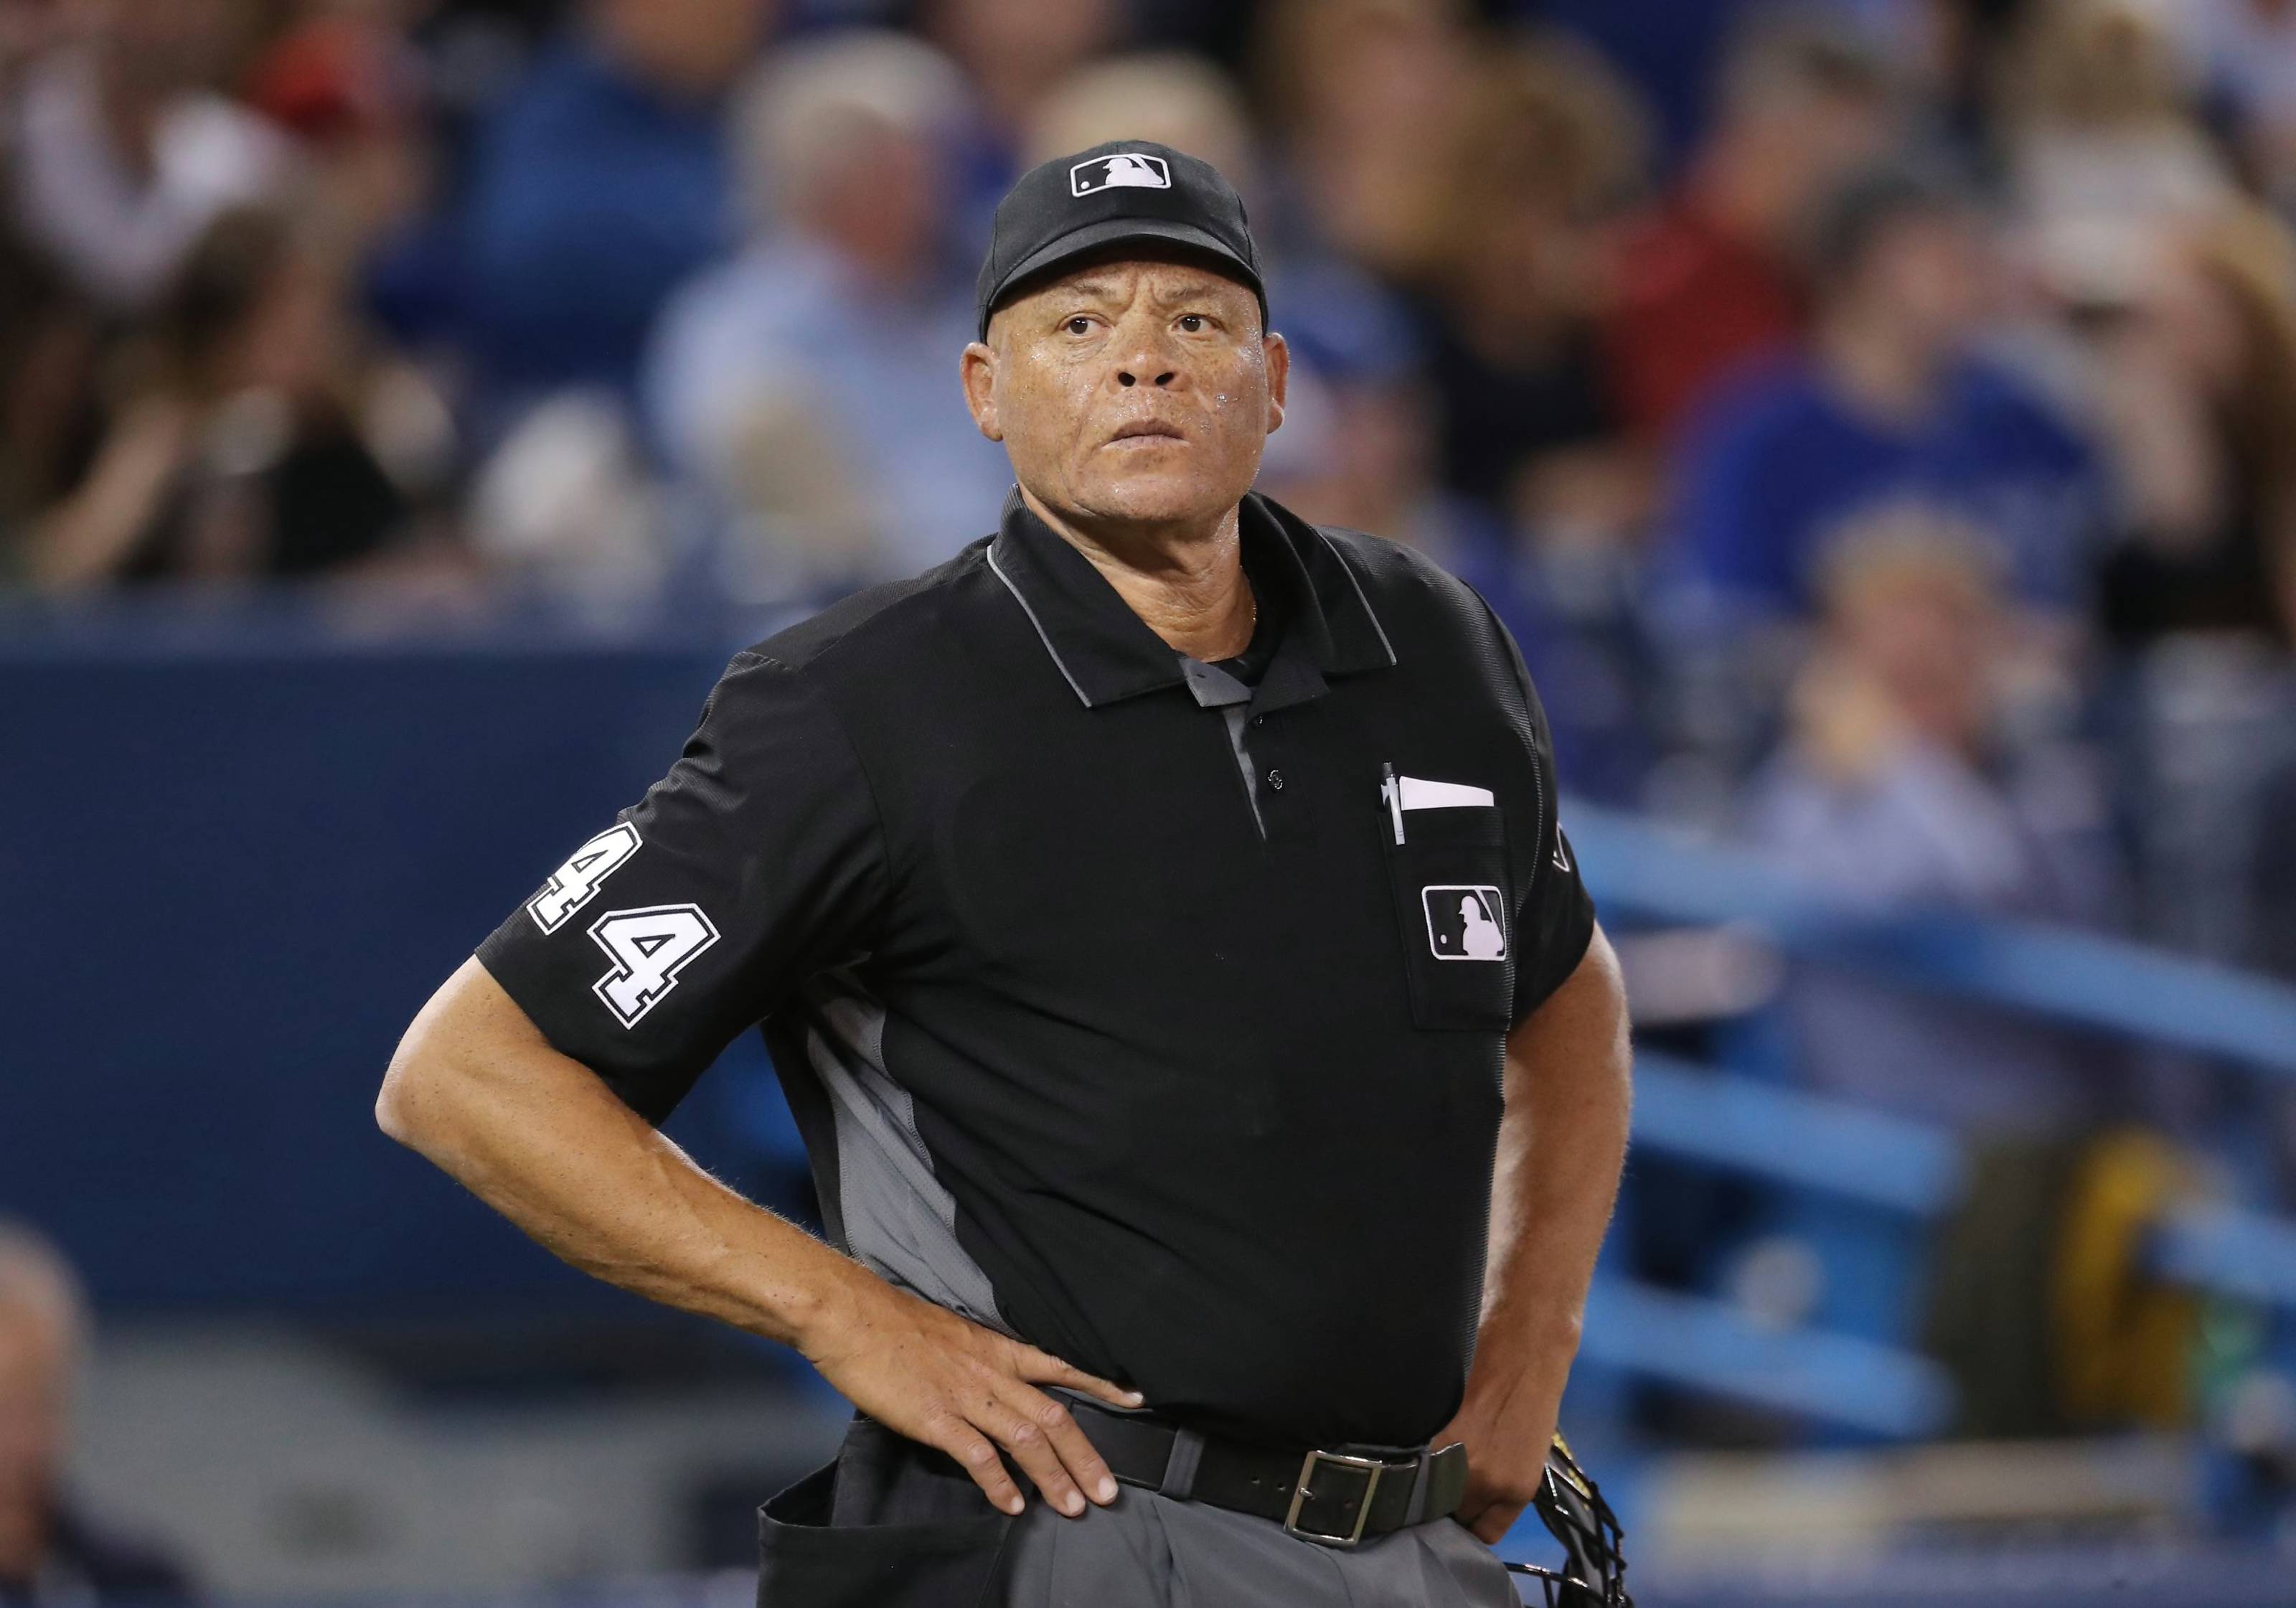 MLB Umpire Kerwin Danley the first black crew chief Page 2